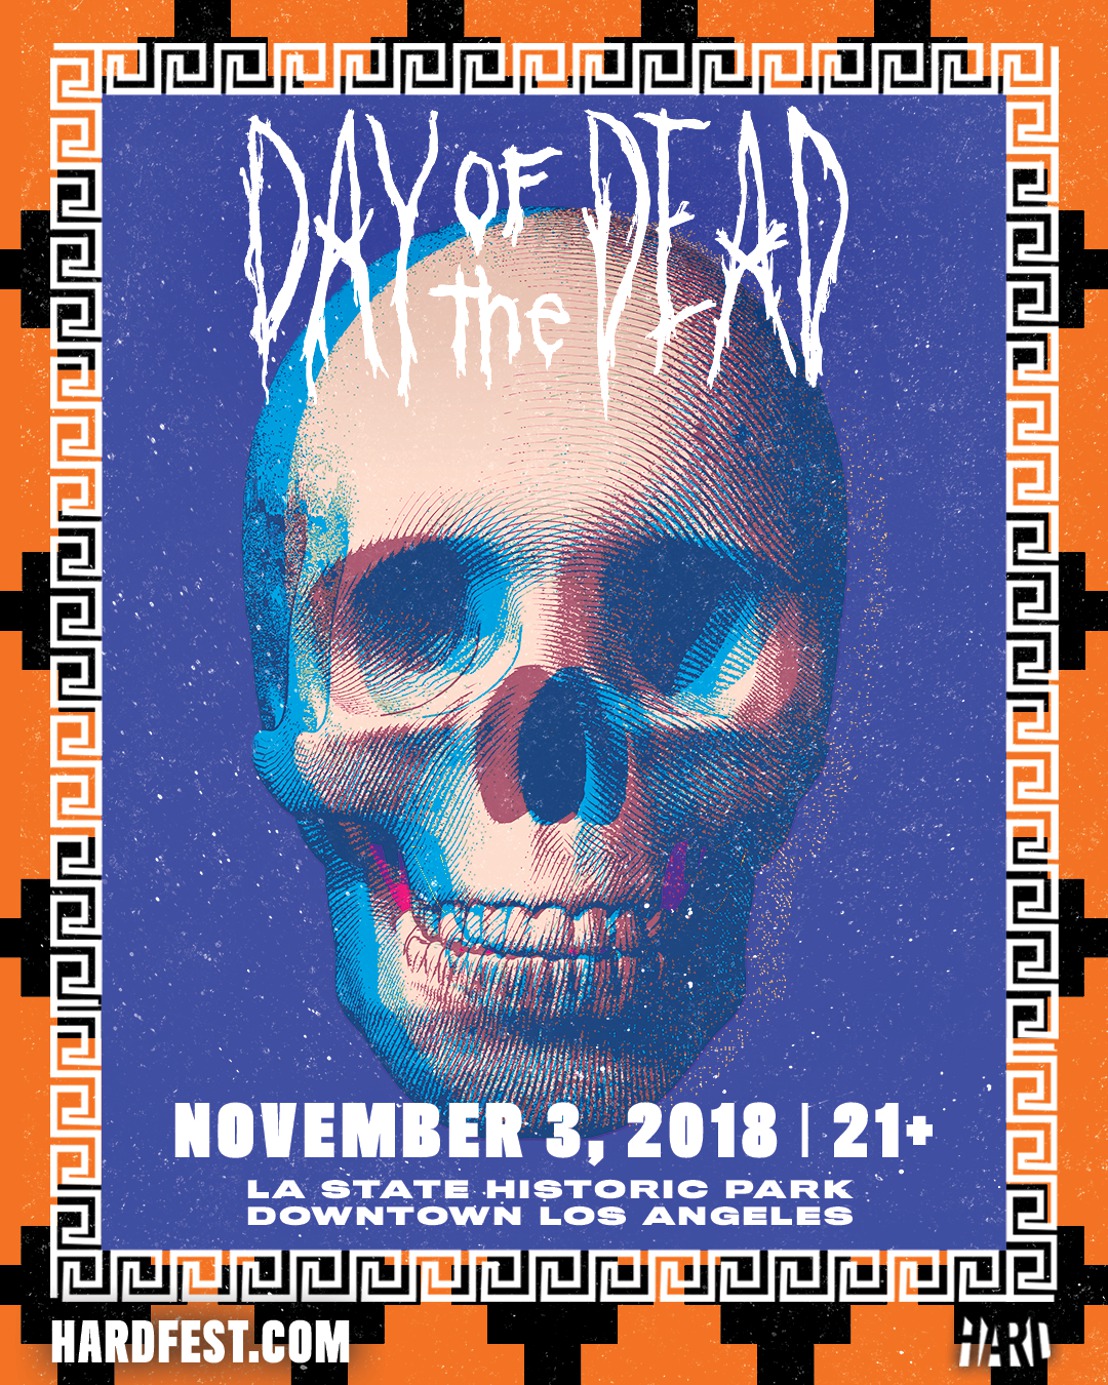 HARD Day of the Dead Event Flier 2018